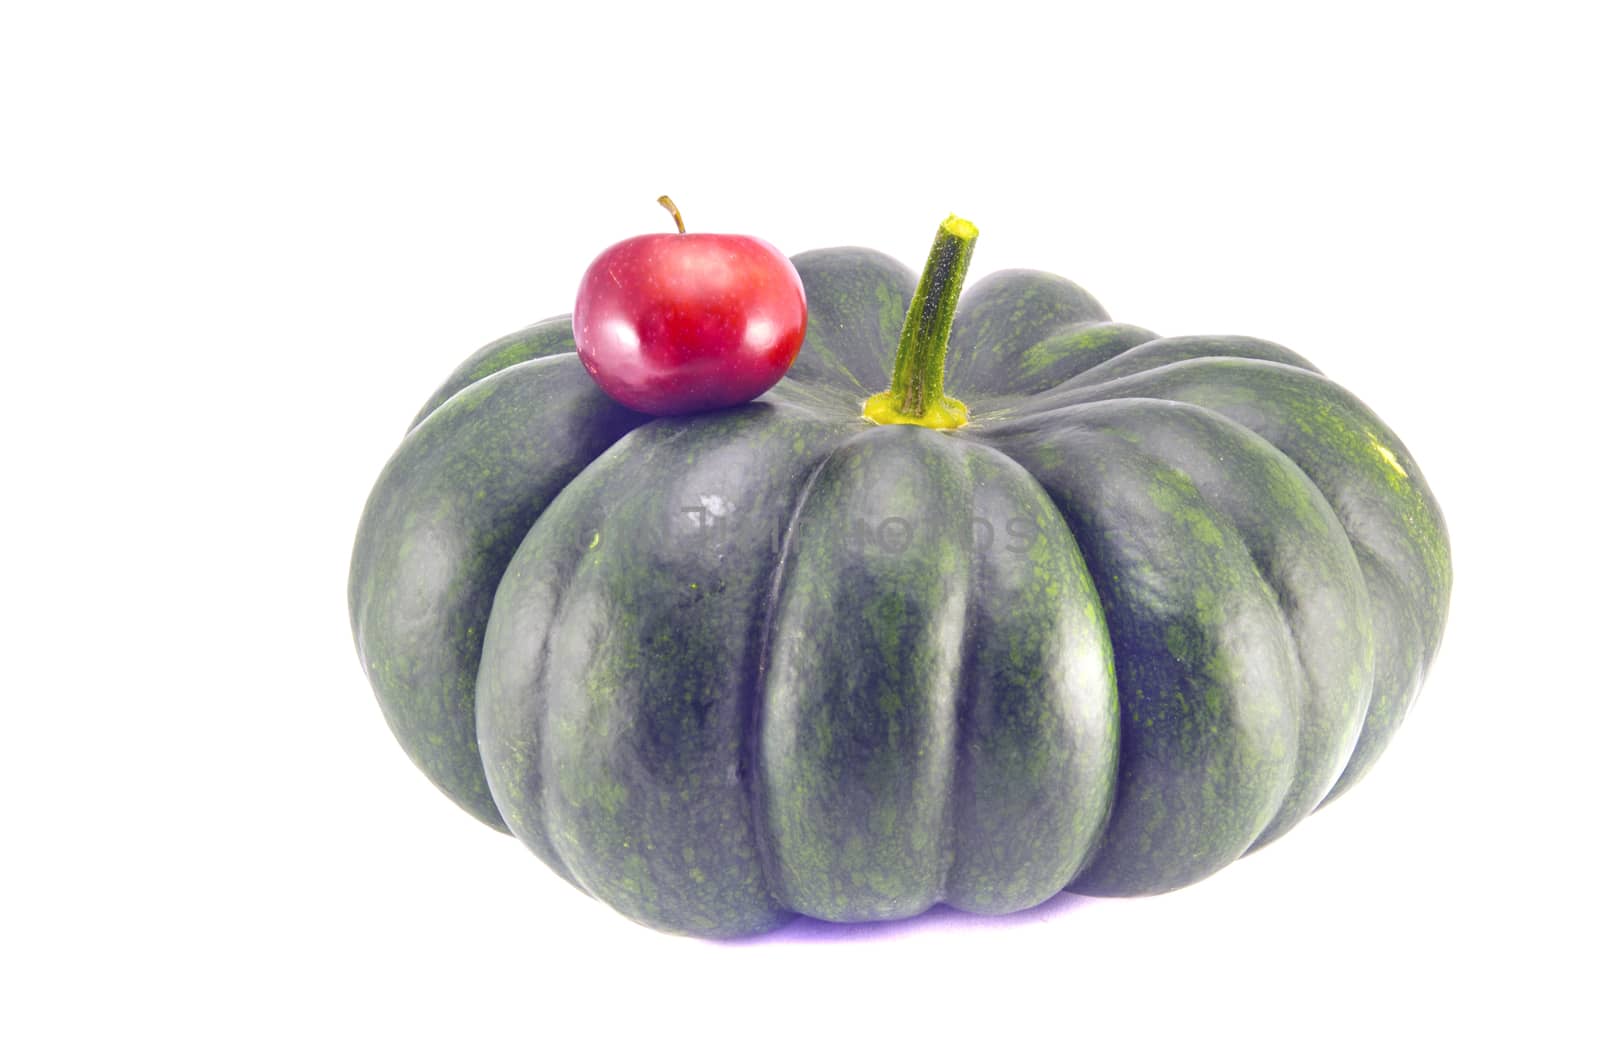 small and big - red apple and green pumpkin isolated on white